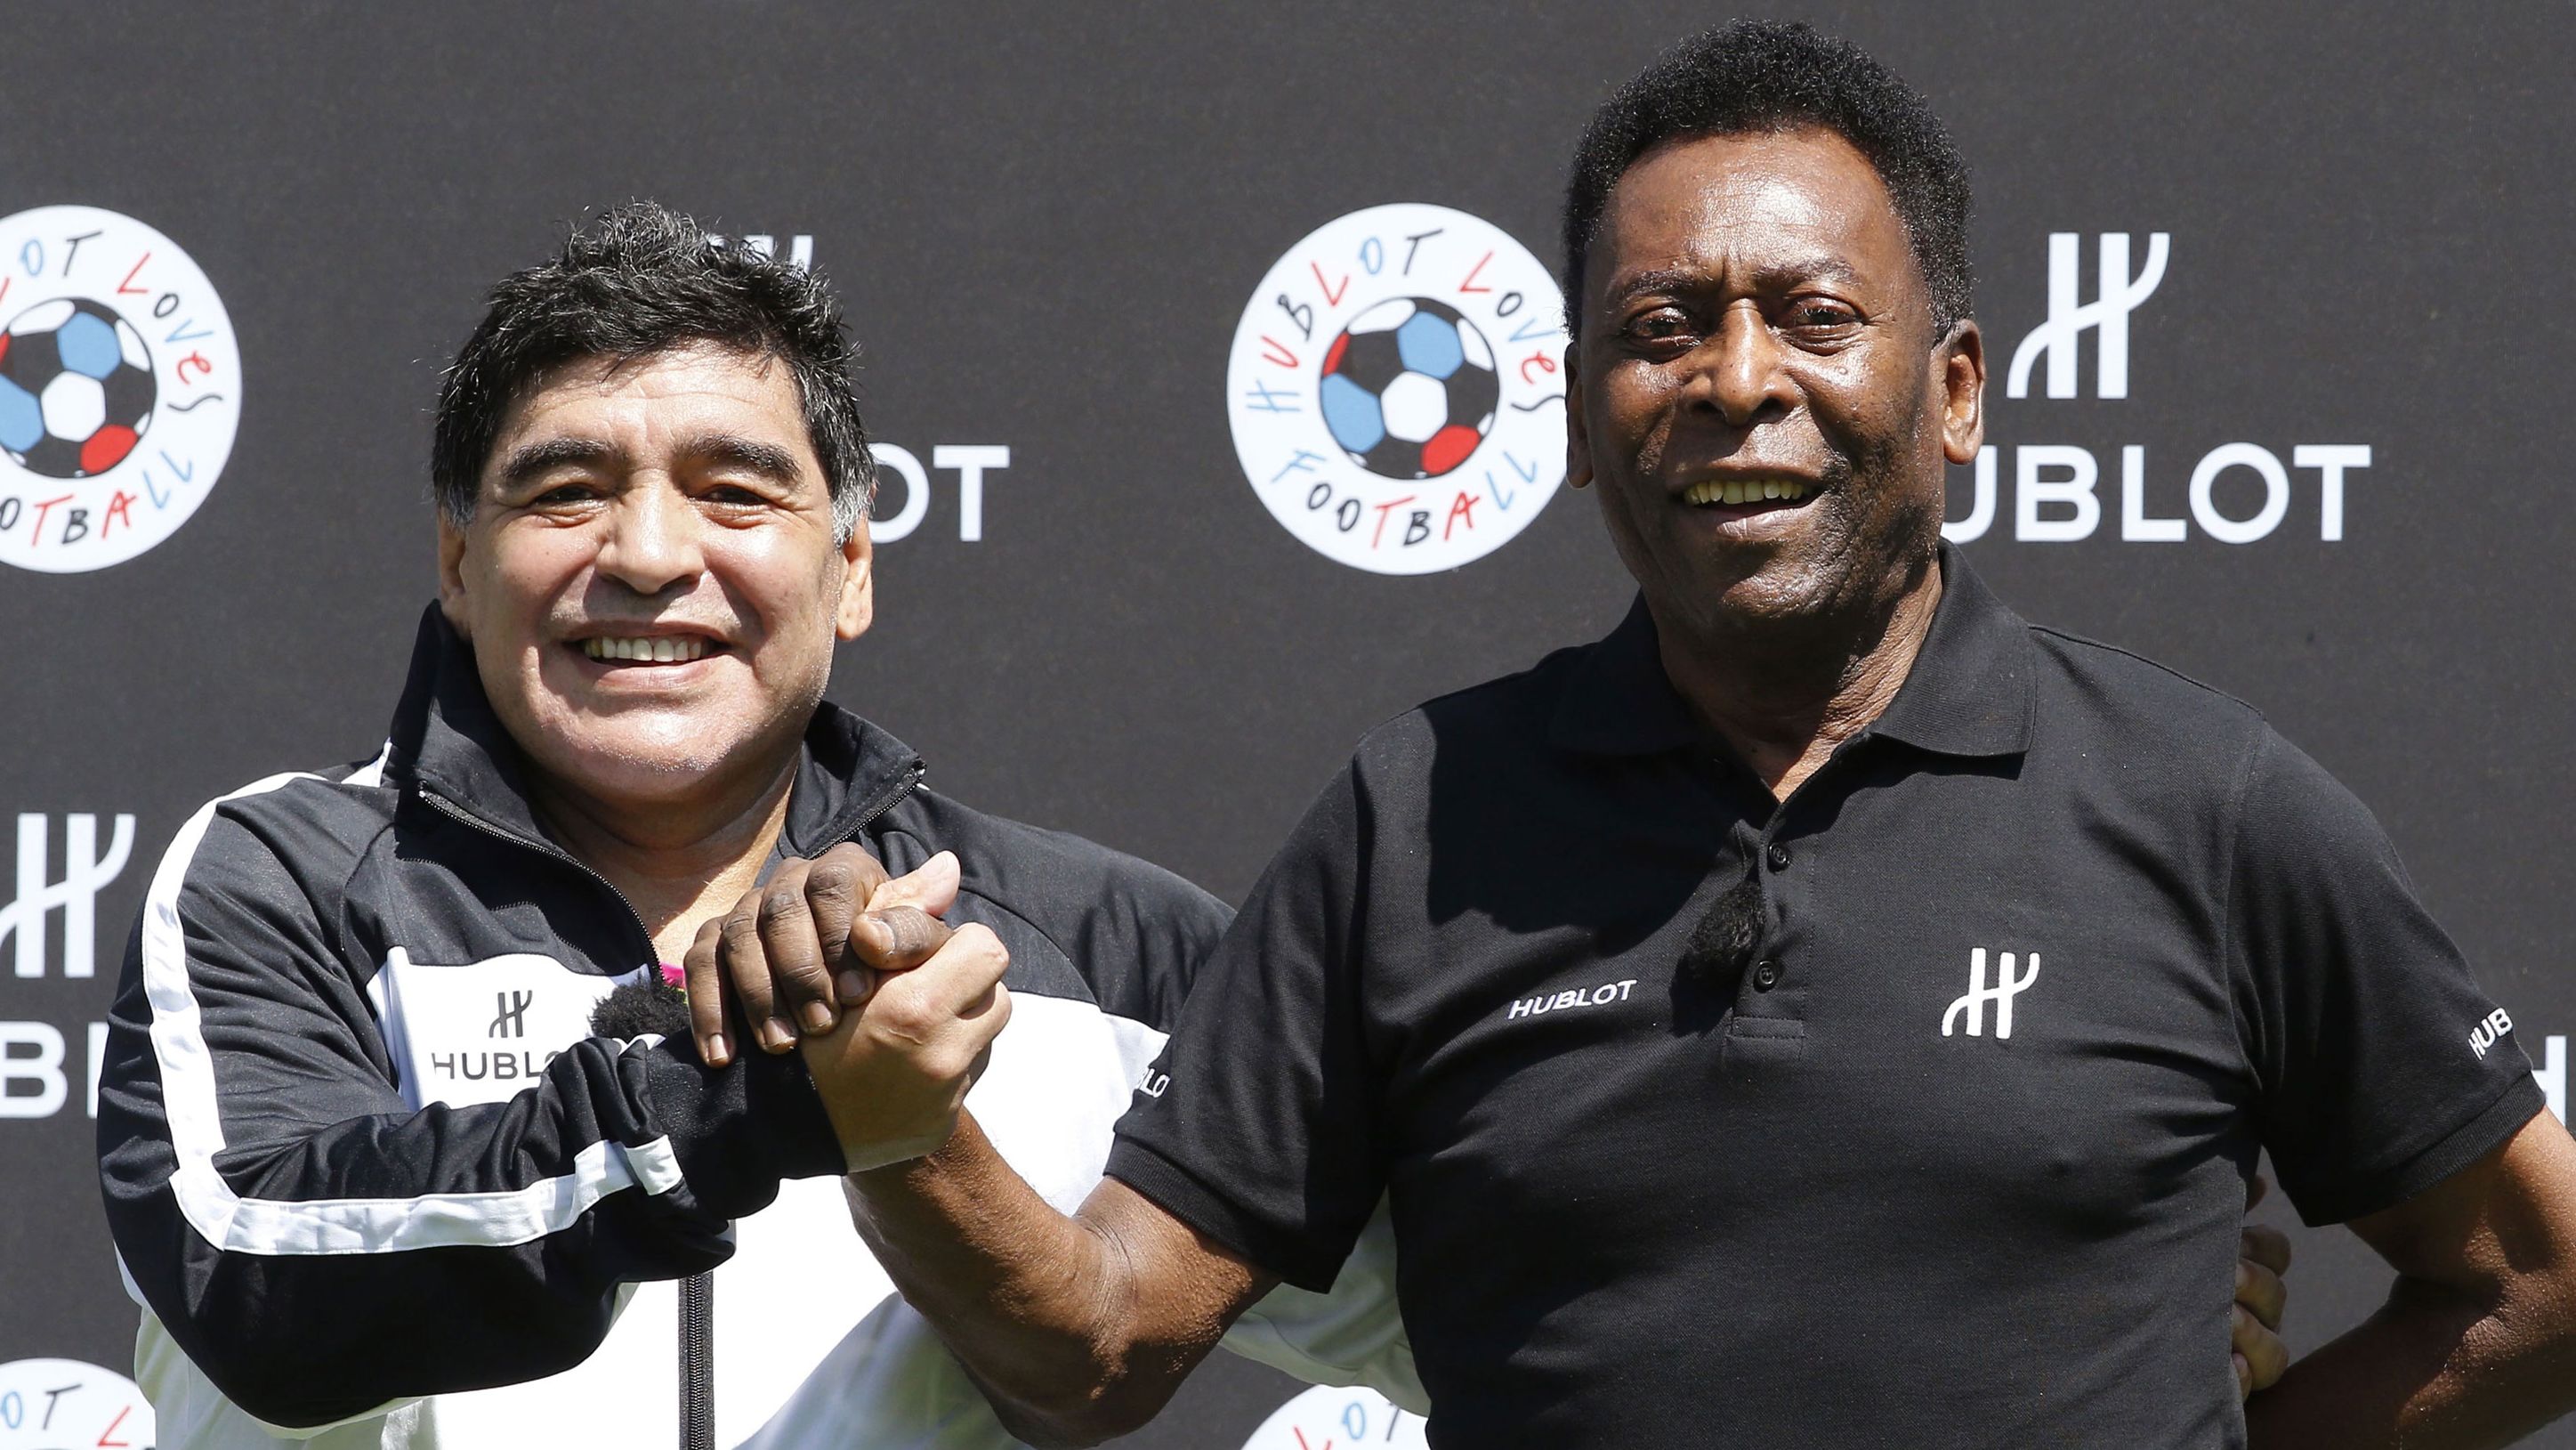 Pelé and Argentine soccer great <a href="http://www.cnn.com/2020/11/25/football/gallery/diego-maradona/index.html" target="_blank">Diego Maradona</a> pose for a photo together in 2016. The two shared FIFA's Player of the Century award in 2000. After Maradona's death in 2020, <a href="https://www.instagram.com/p/CIBZkvFlwhU/" target="_blank" target="_blank">Pelé paid tribute to his "dear friend" on Instagram:</a> "One day, I hope, we will play soccer together in the sky."